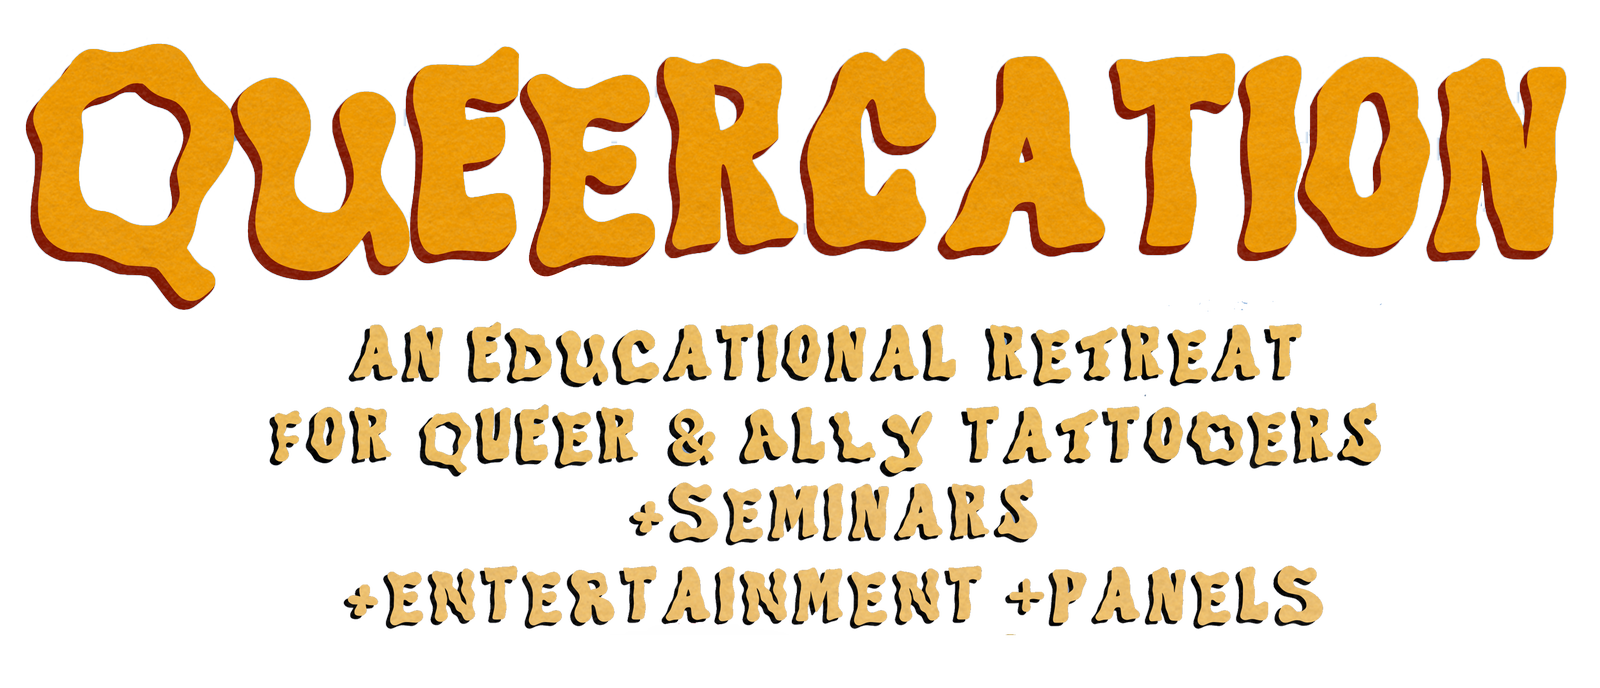 Queercation Tattoo Conference